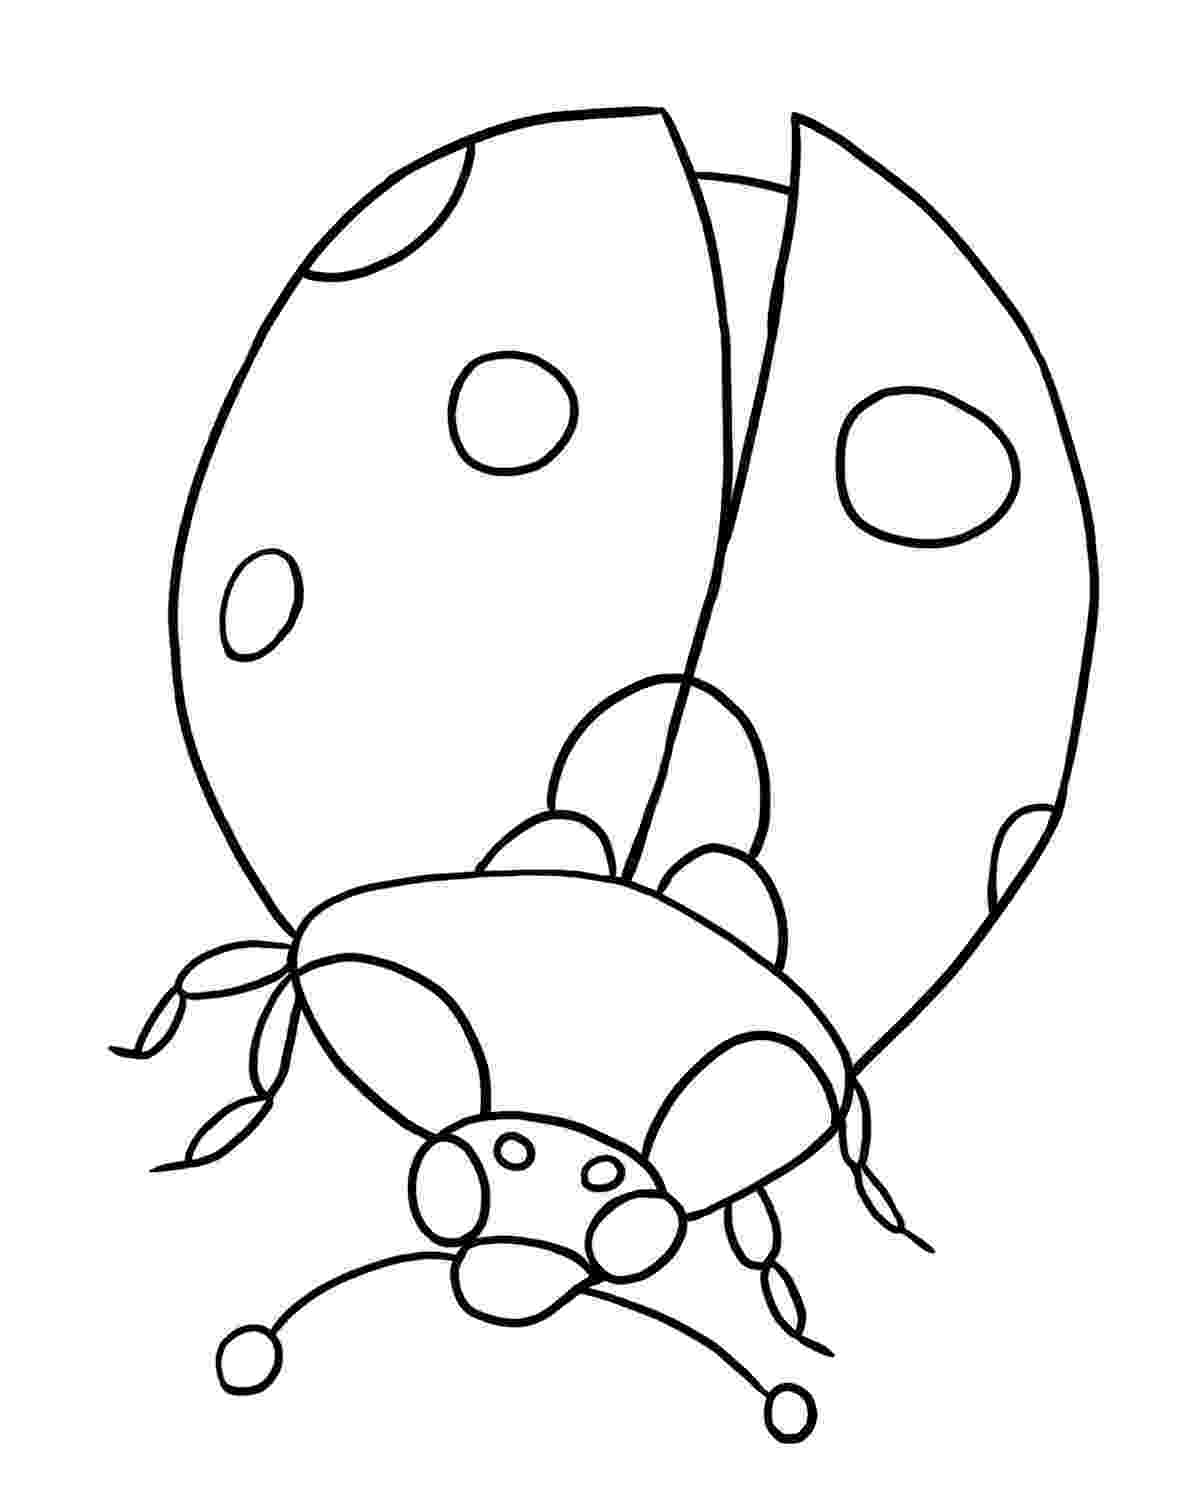 ladybug coloring sheet ladybug coloring pages to download and print for free coloring sheet ladybug 1 1